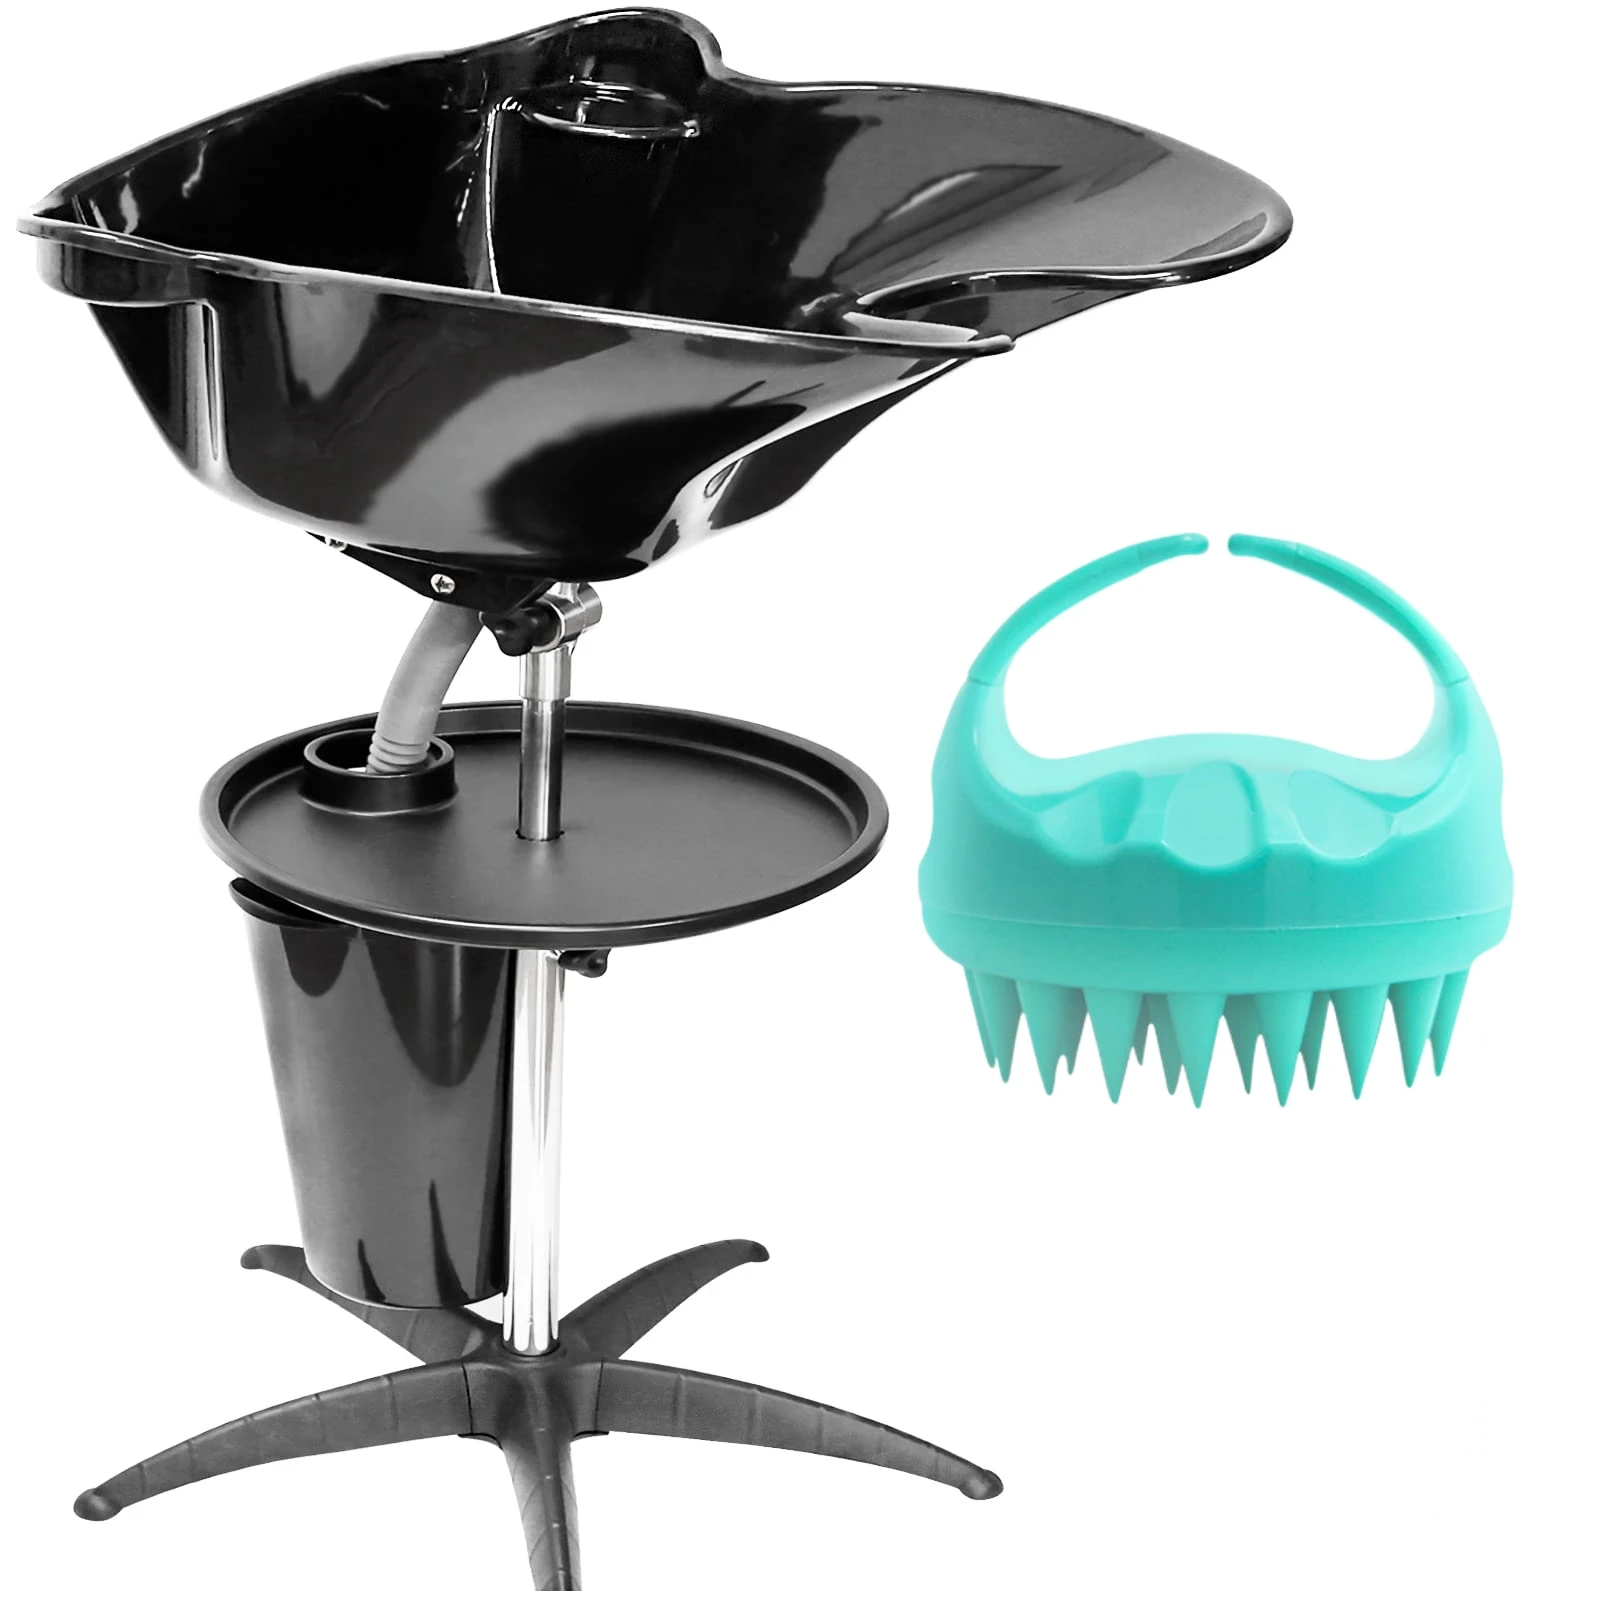 Salon Basin Shampoo Sink with Drain Portable Stainless Steel Pipe Support Adjustable Height Barbershops Hair Backwash Bowl pipe dredging brush bathroom hair sewer sink cleaning brush drain cleaner clog plug hole remover sewer pipeline cleaning tools